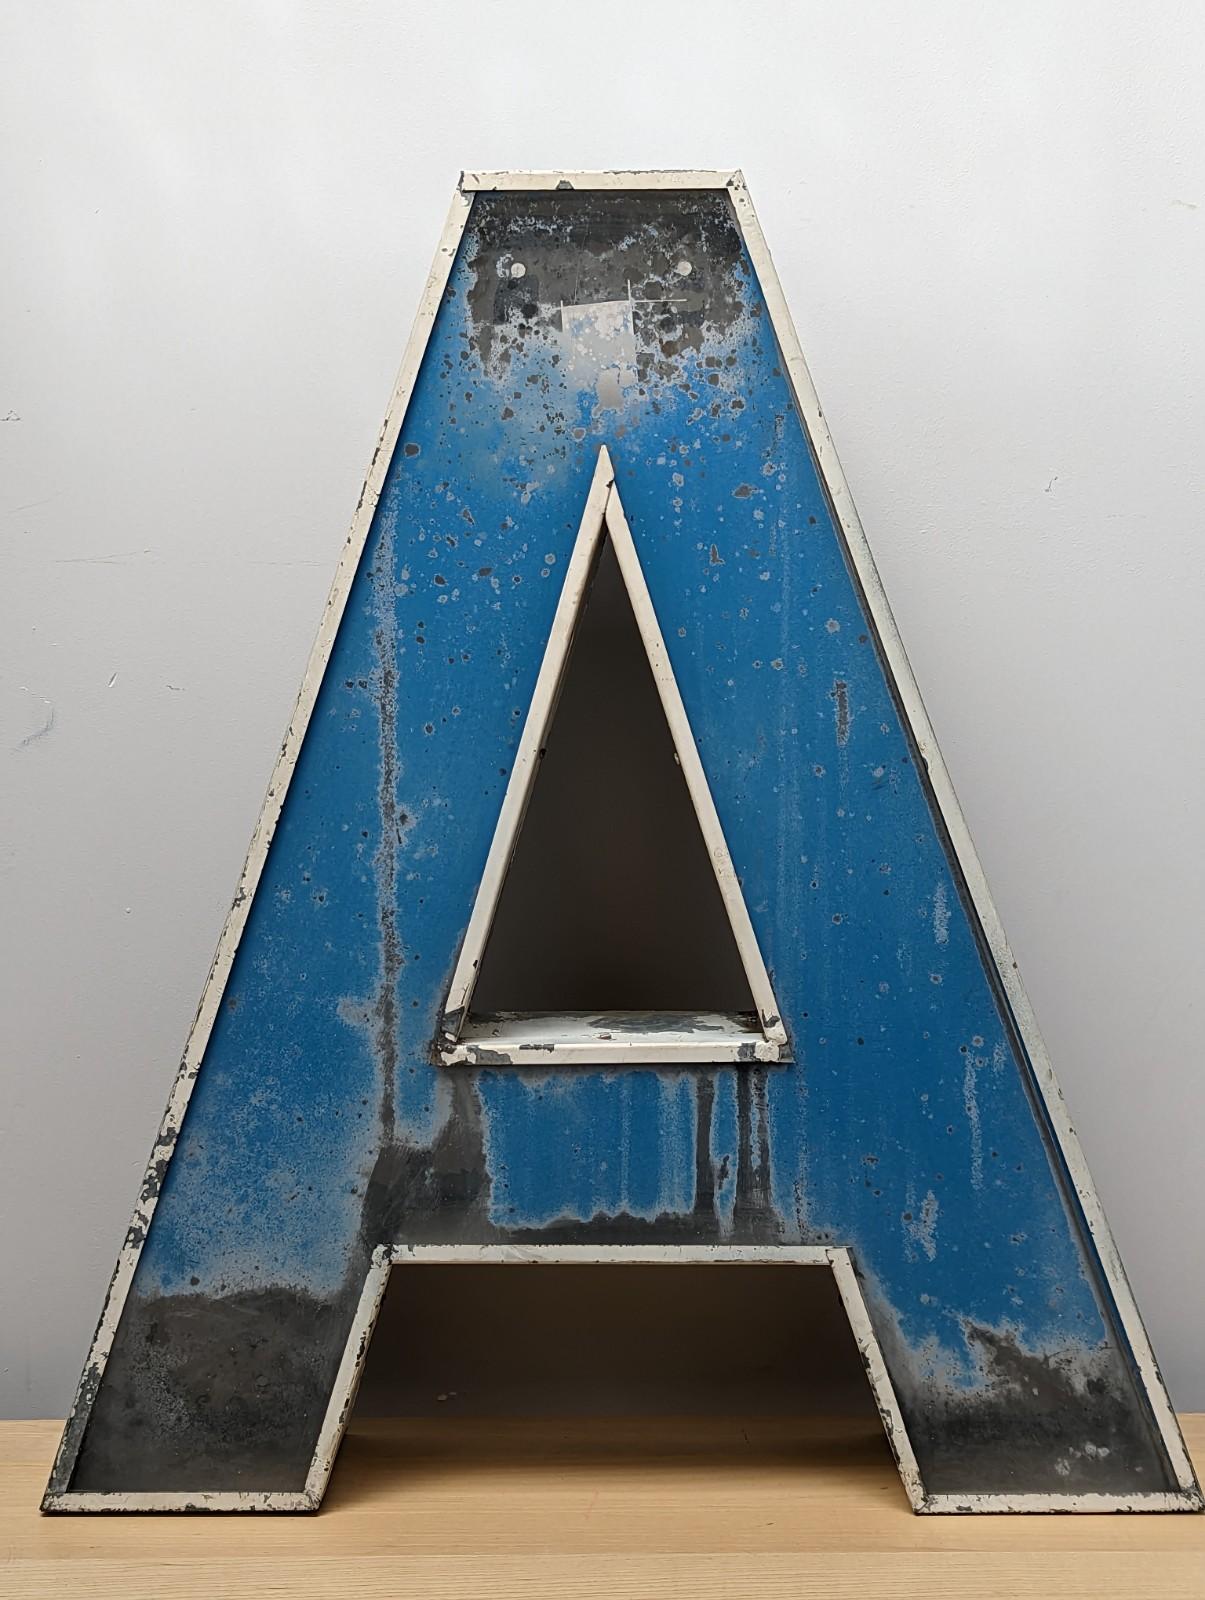 A stunning vintage metal advertising letter A.

The patina on this item is sensational.